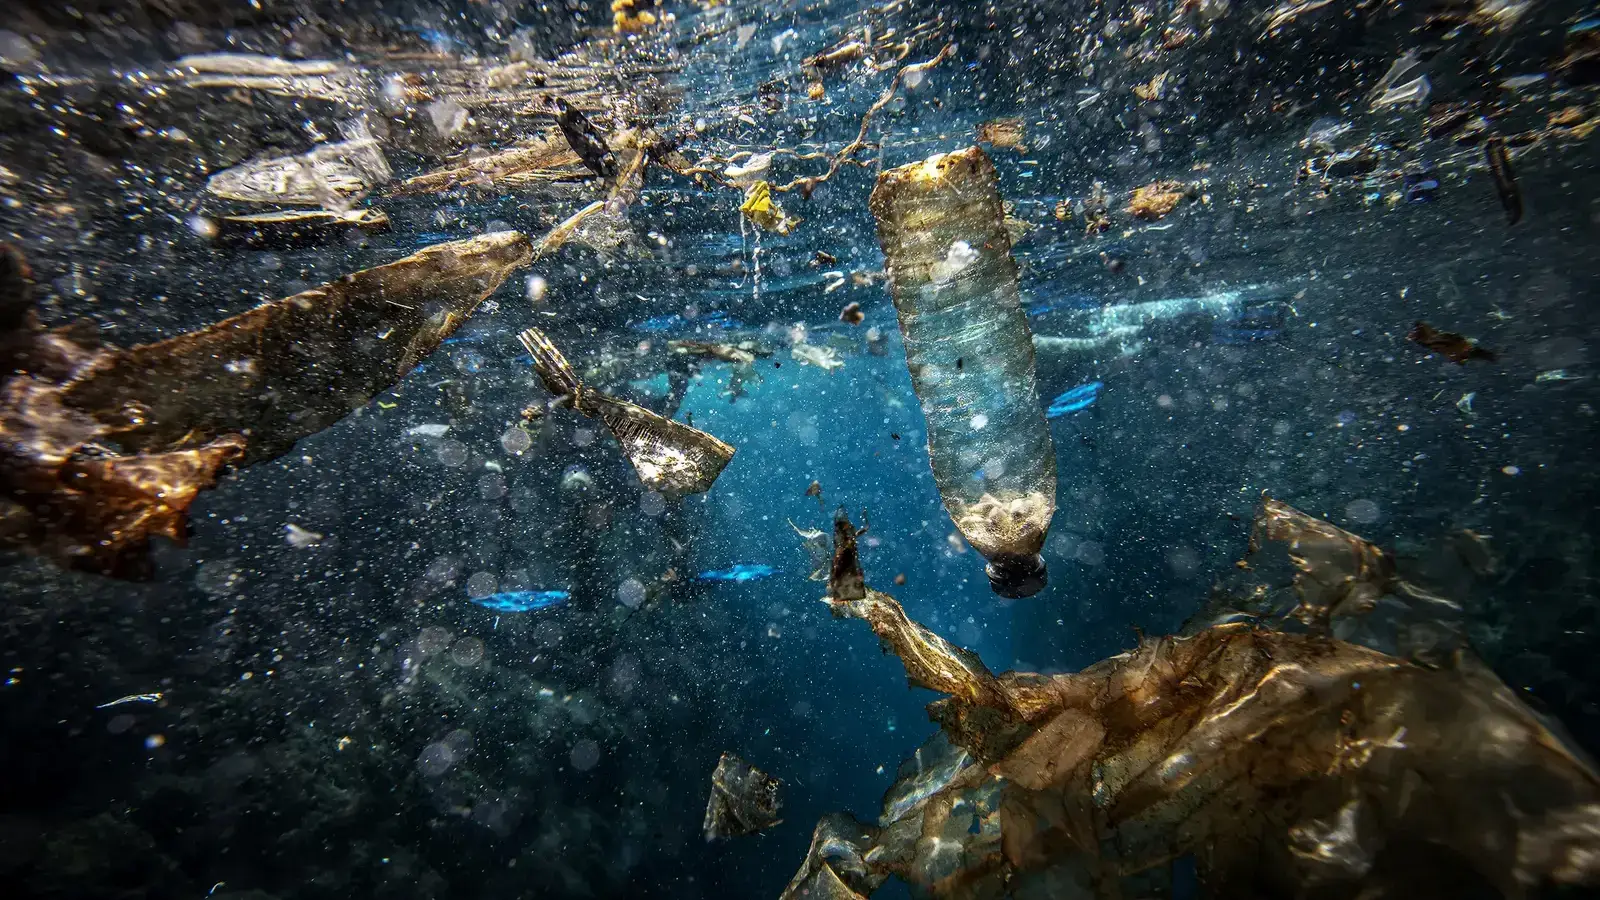 This treaty could stop plastic pollution—or doom the Earth to drown in it